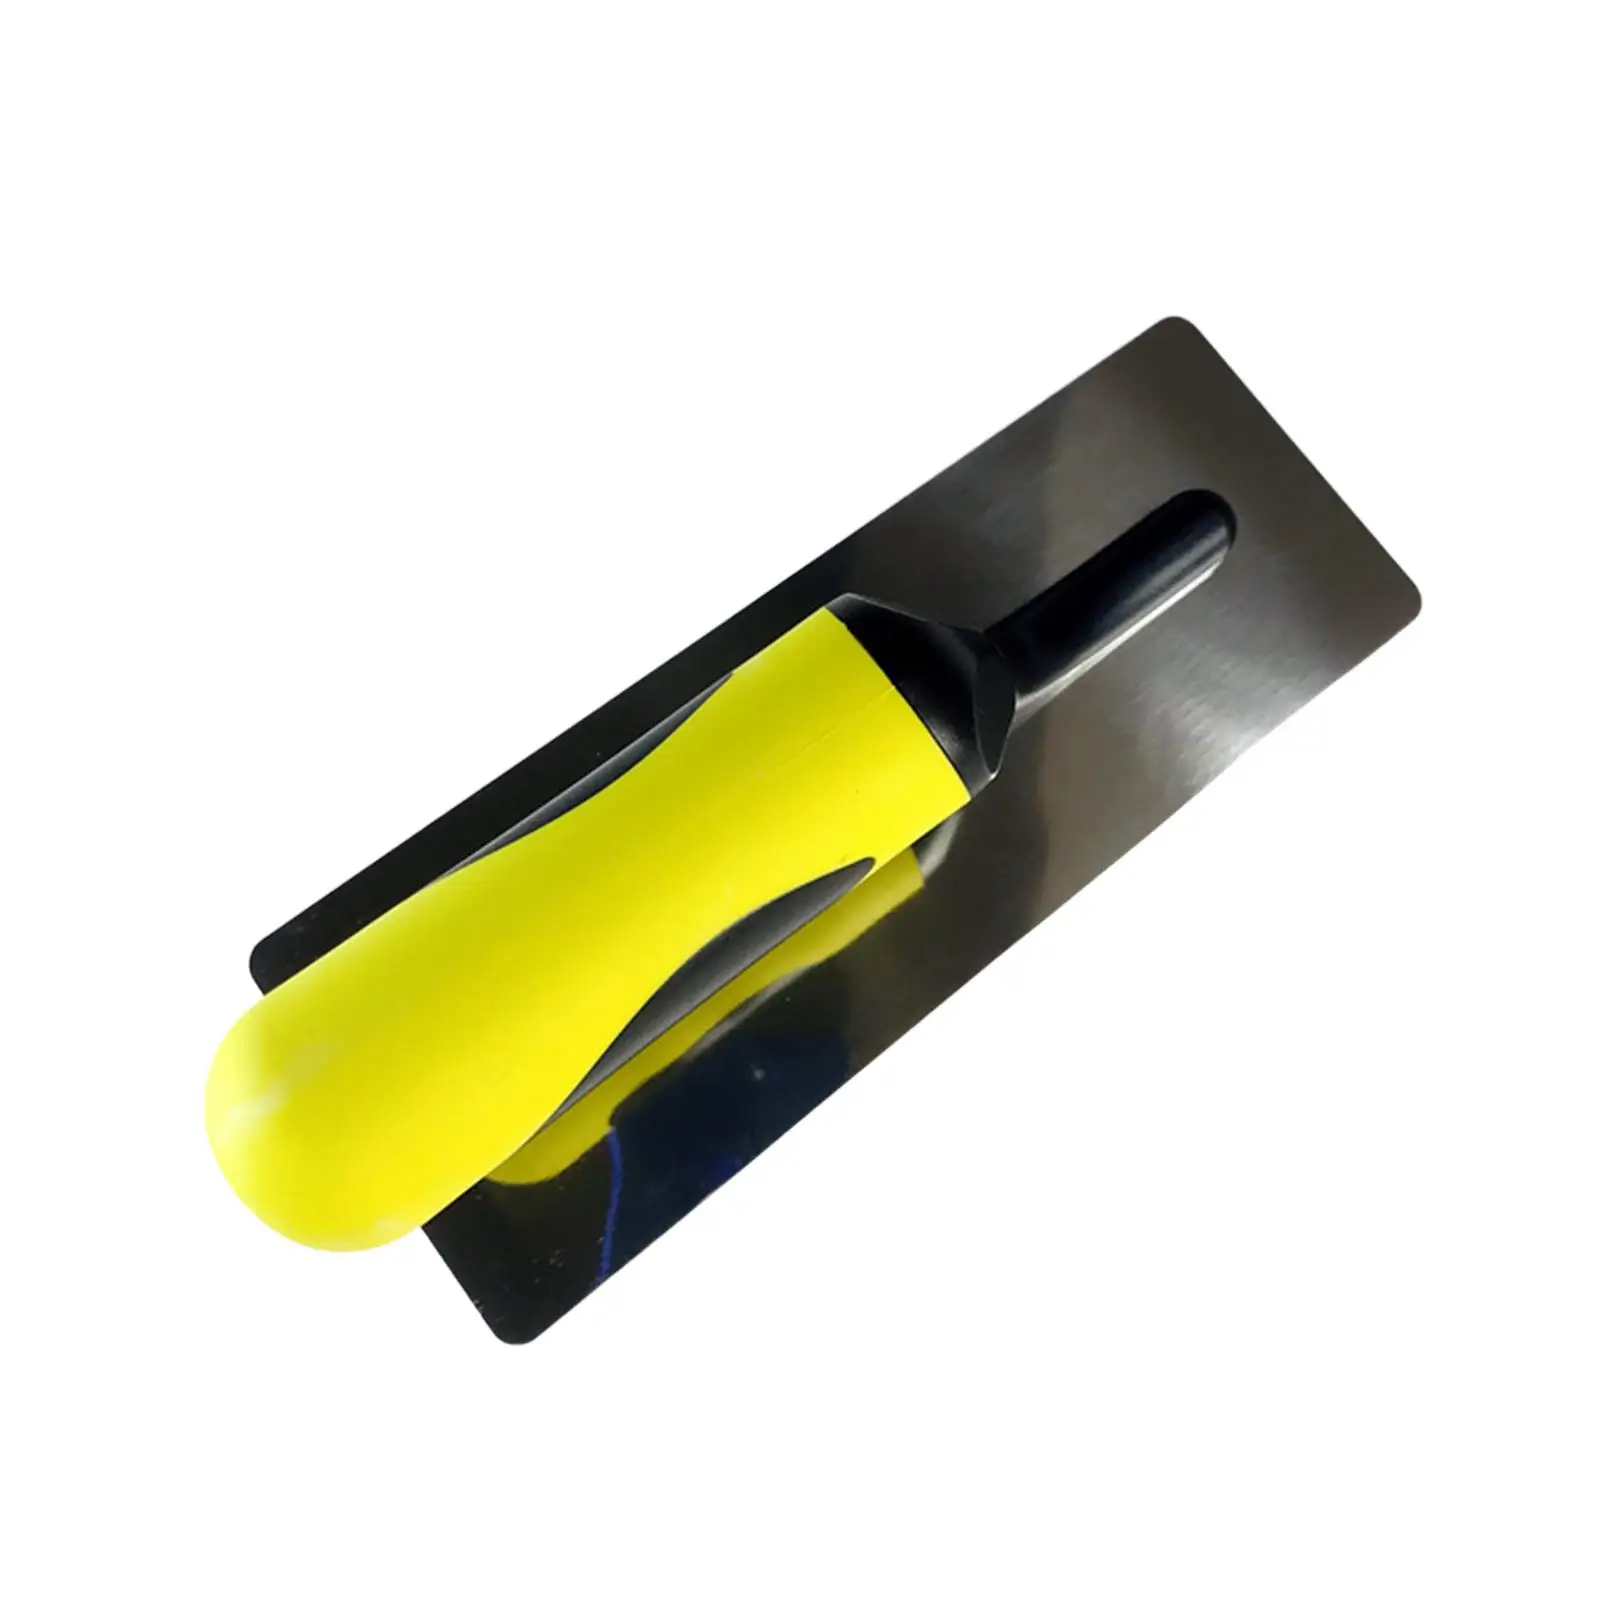 Finisher Plastering Trowel Paint Tool Home Sturdy Thick Multitool Paint Scraper for Plastering Drywall Scraping Wall Refinishing